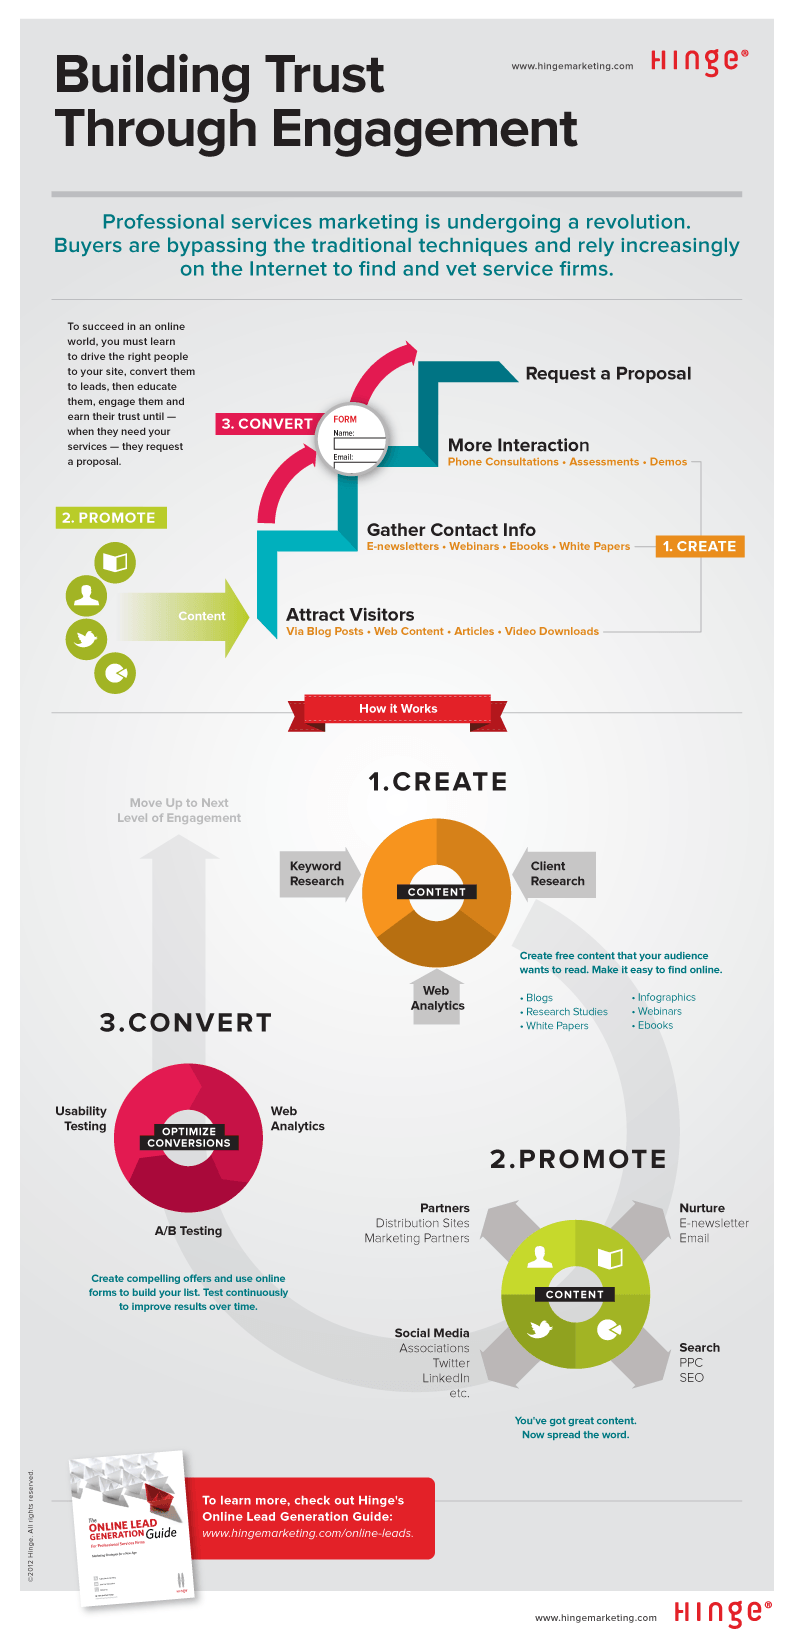 The Lead Generation Process for Professional Services - Hinge Marketing